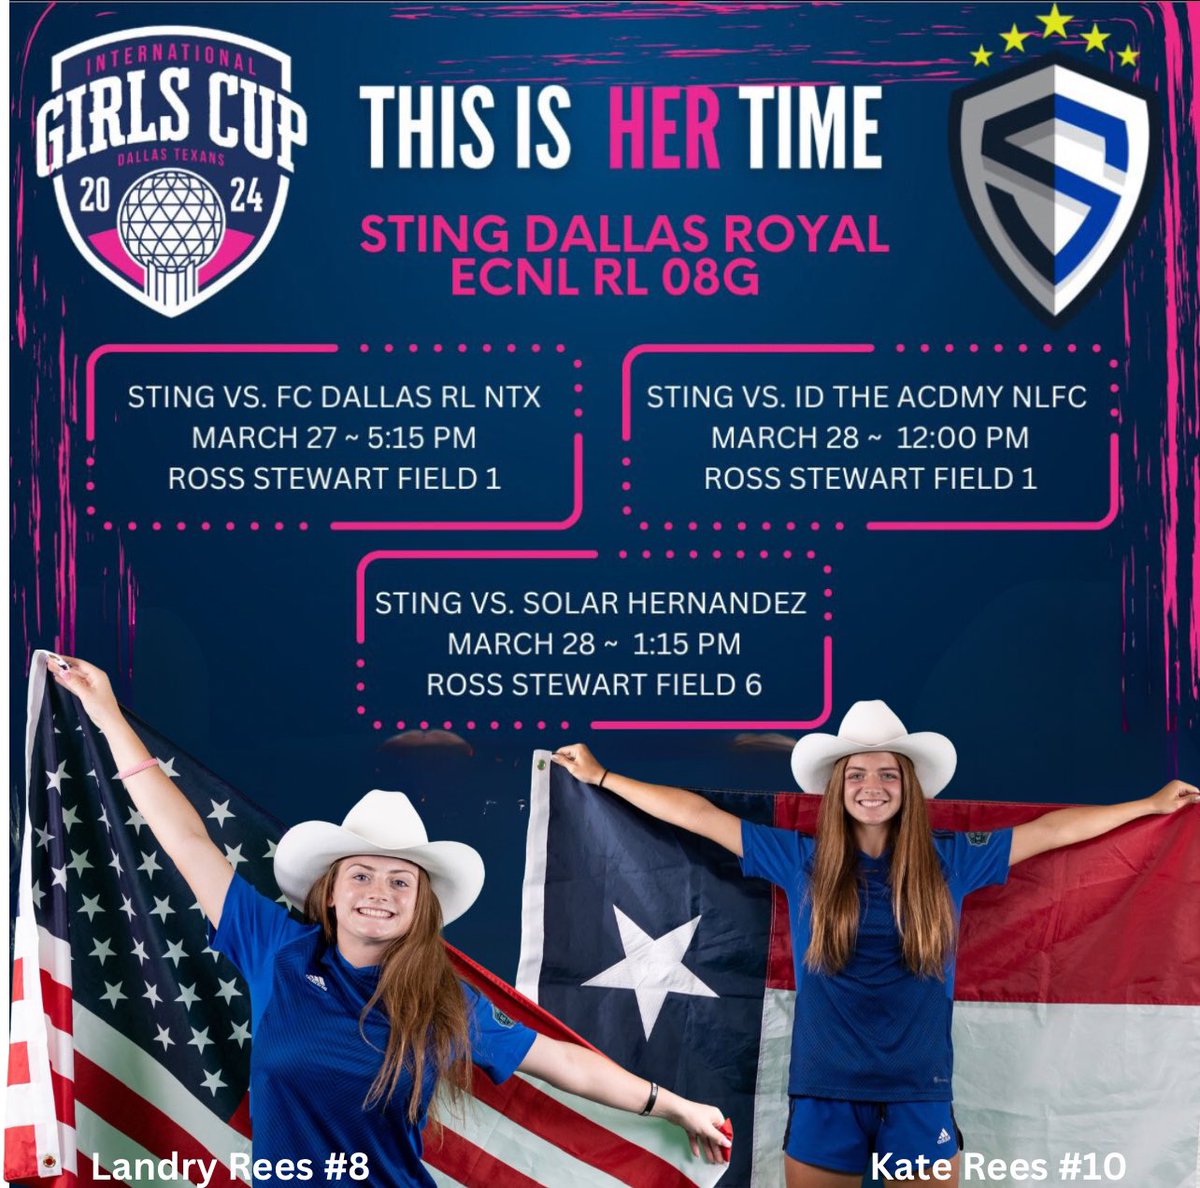 So excited to be playing at the @DallasGirlsCup this week!!! Come watch our amazing team @Royal08g !!! @NickSoutar @ImYouthSoccer @PrepSoccer @ImCollegeSoccer @PrepSoccerTX